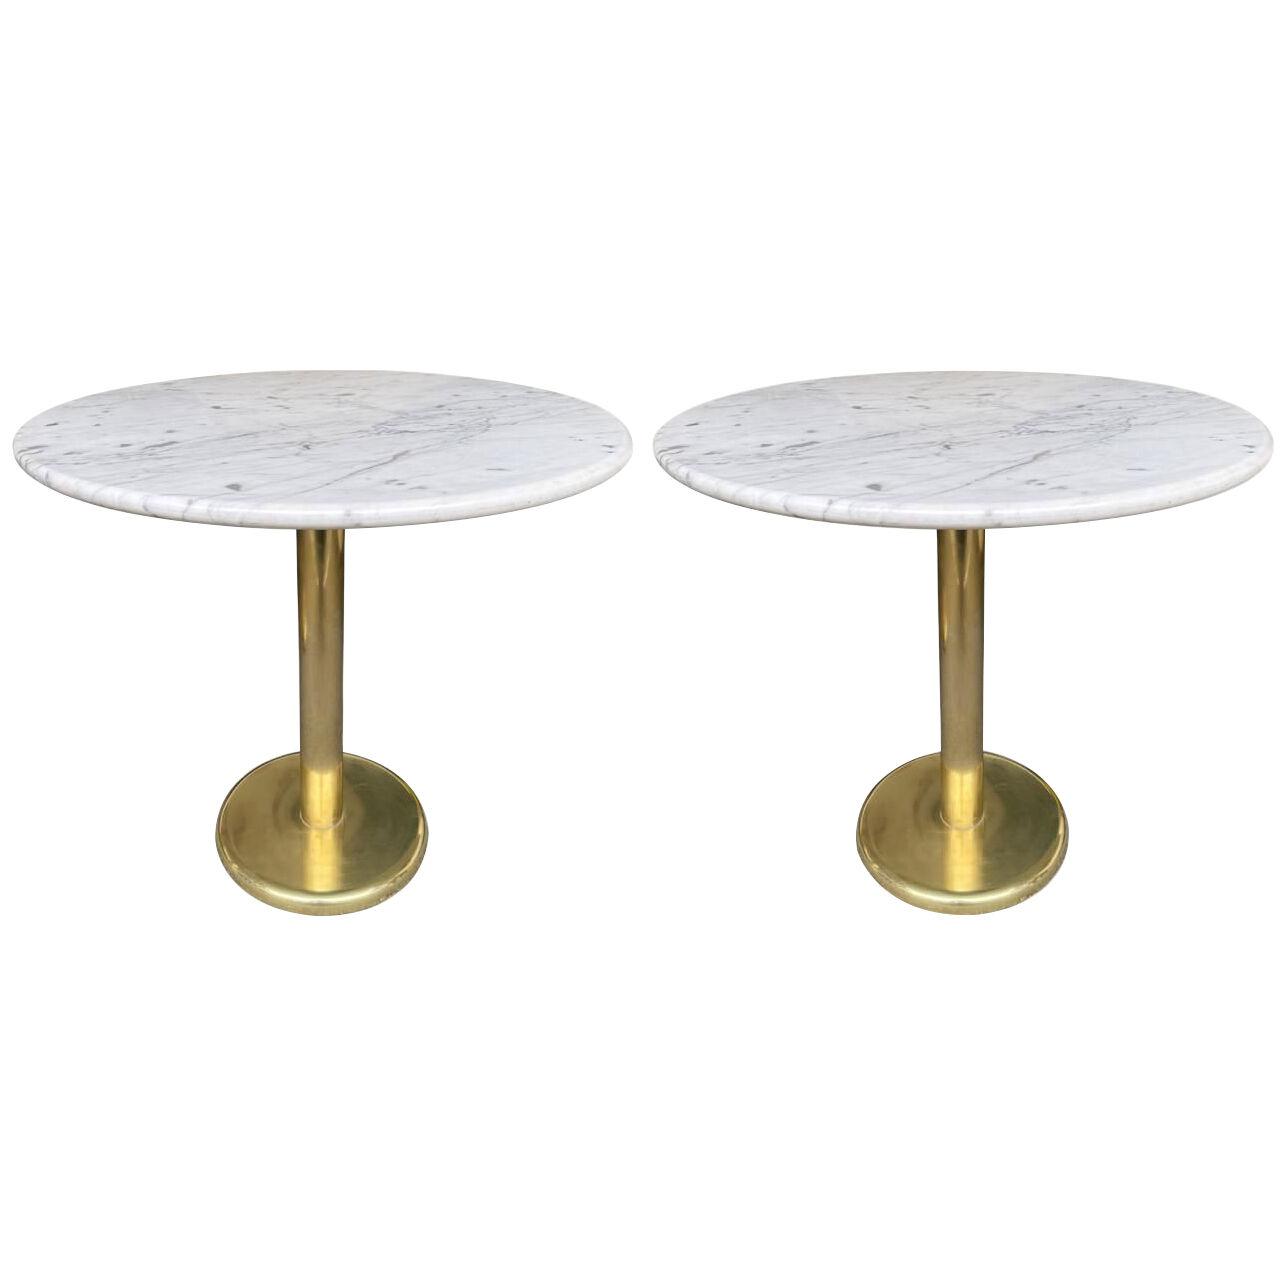 Pair of Brass and Marble Side Table. Italy, 1970s